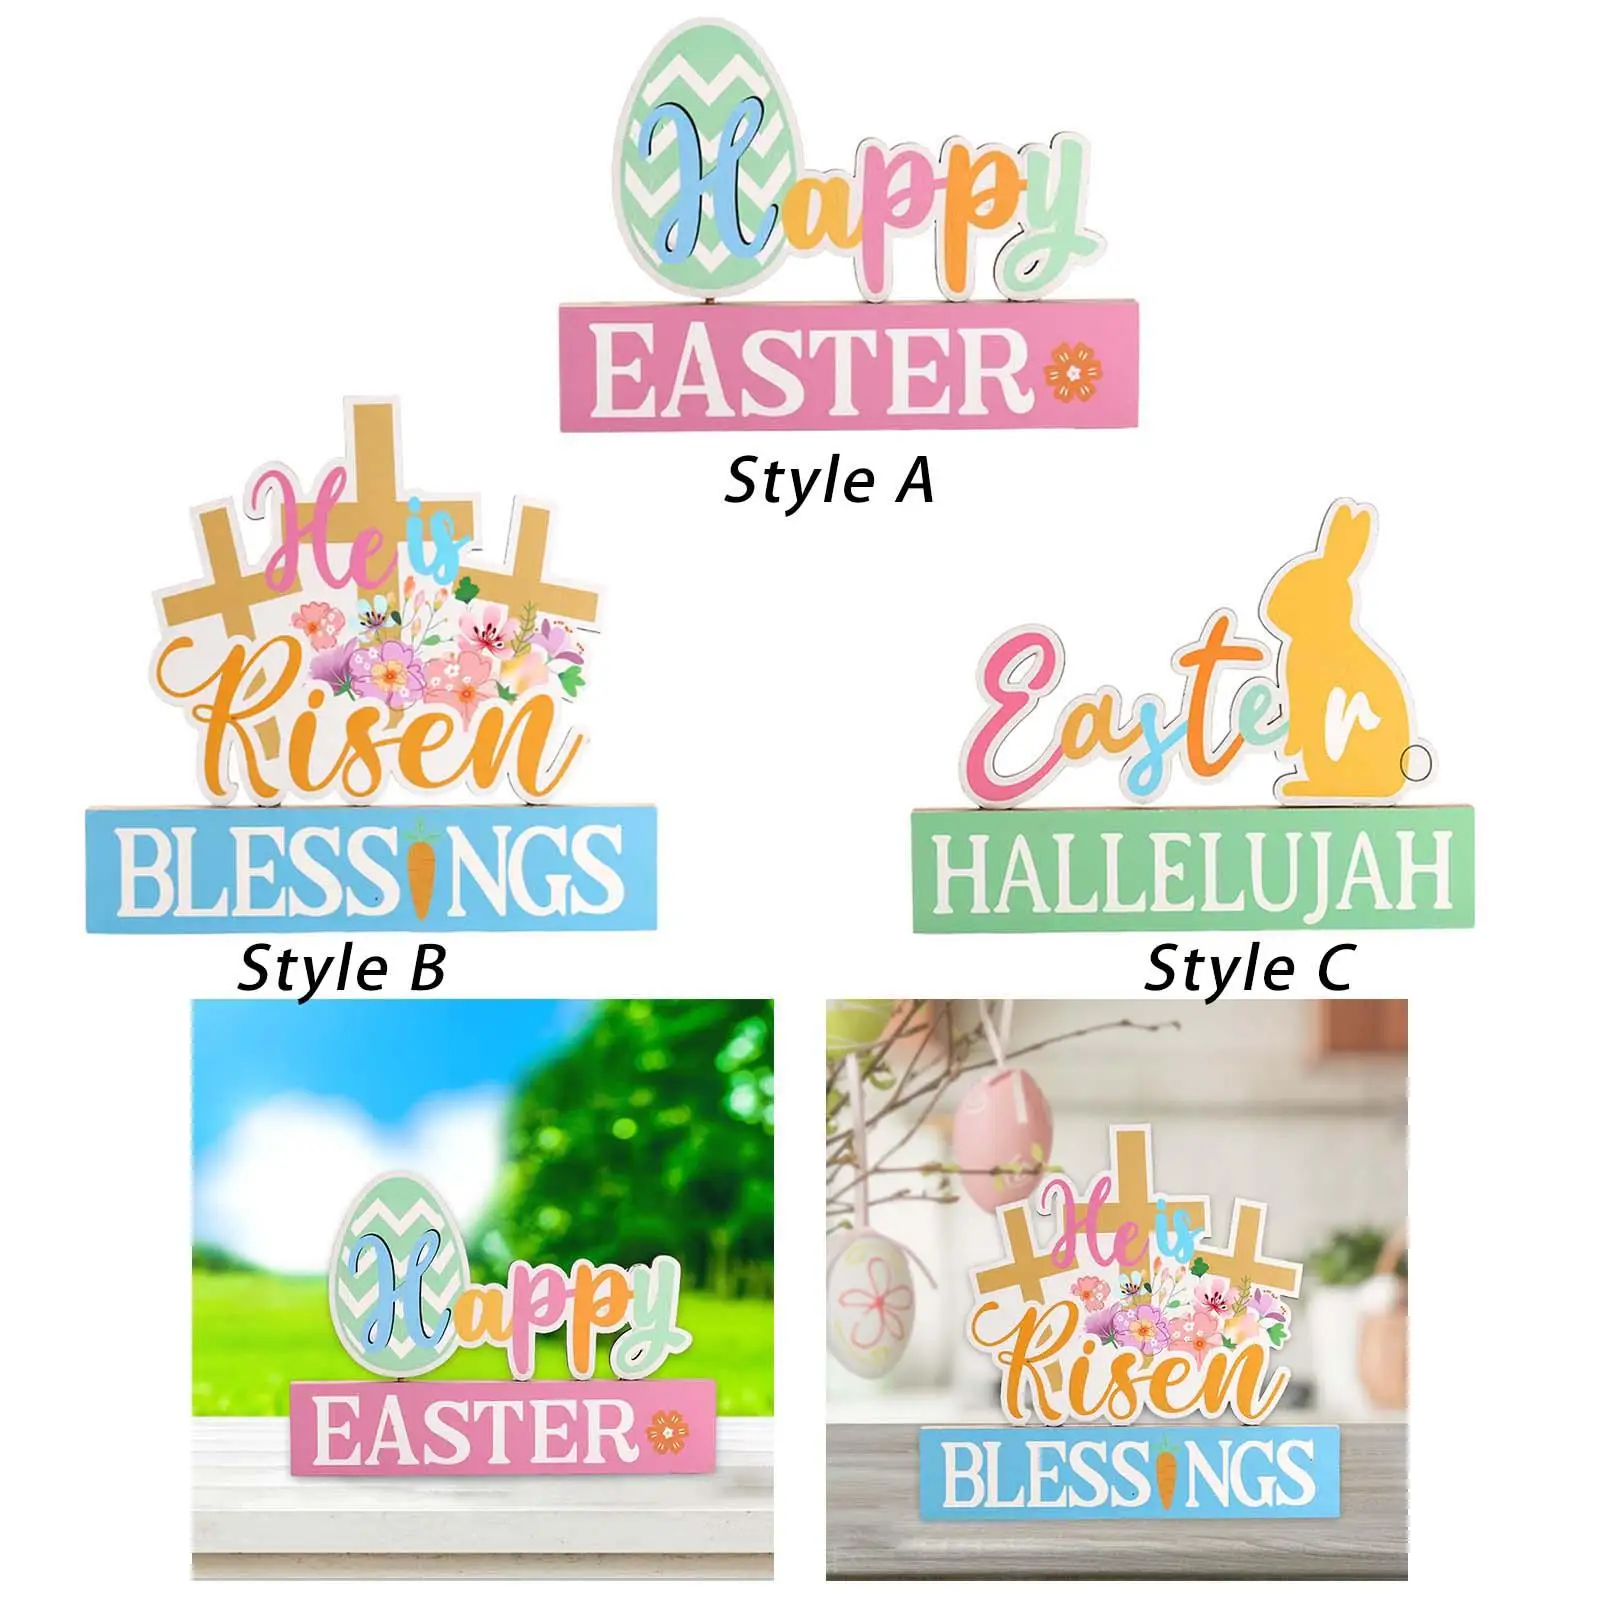 Happy Easter Table Decorations Letter Sign Colorful Centerpieces for Holiday